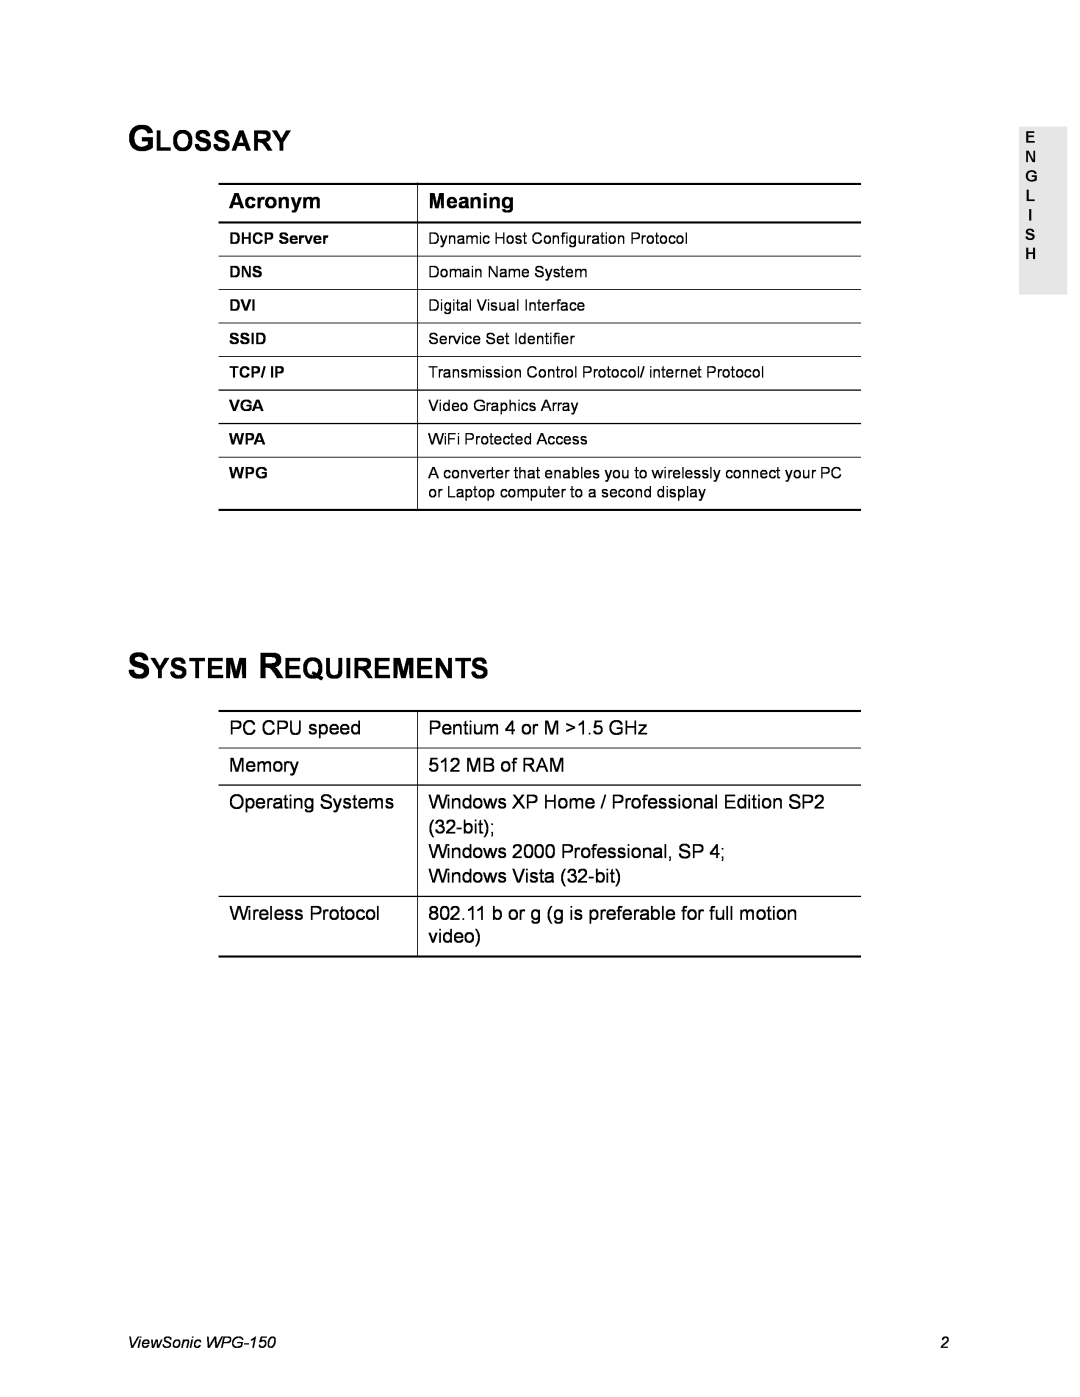 ViewSonic WPG-150 manual Glossary, System Requirements, Acronym, Meaning 